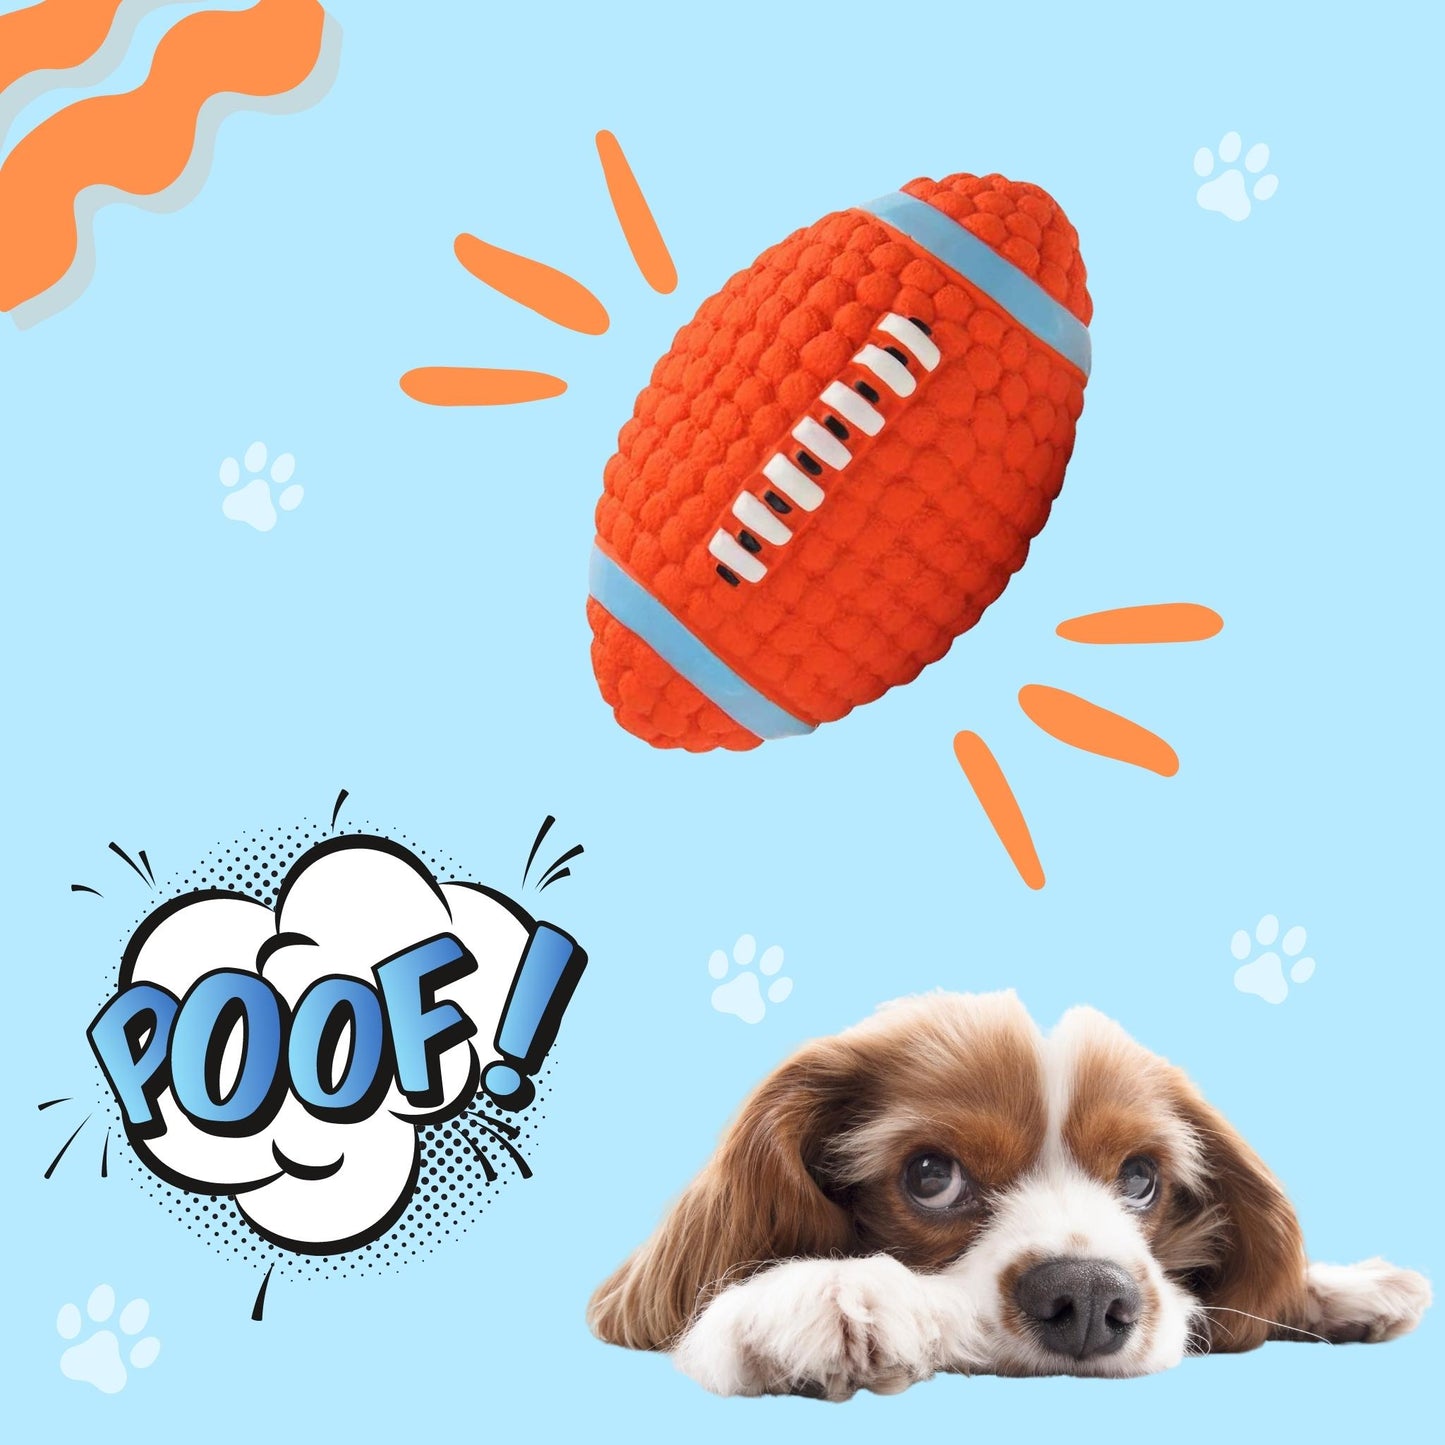 Foodie Puppies Latex Squeaky Toy for Small Dogs & Puppies - Rugby, Small